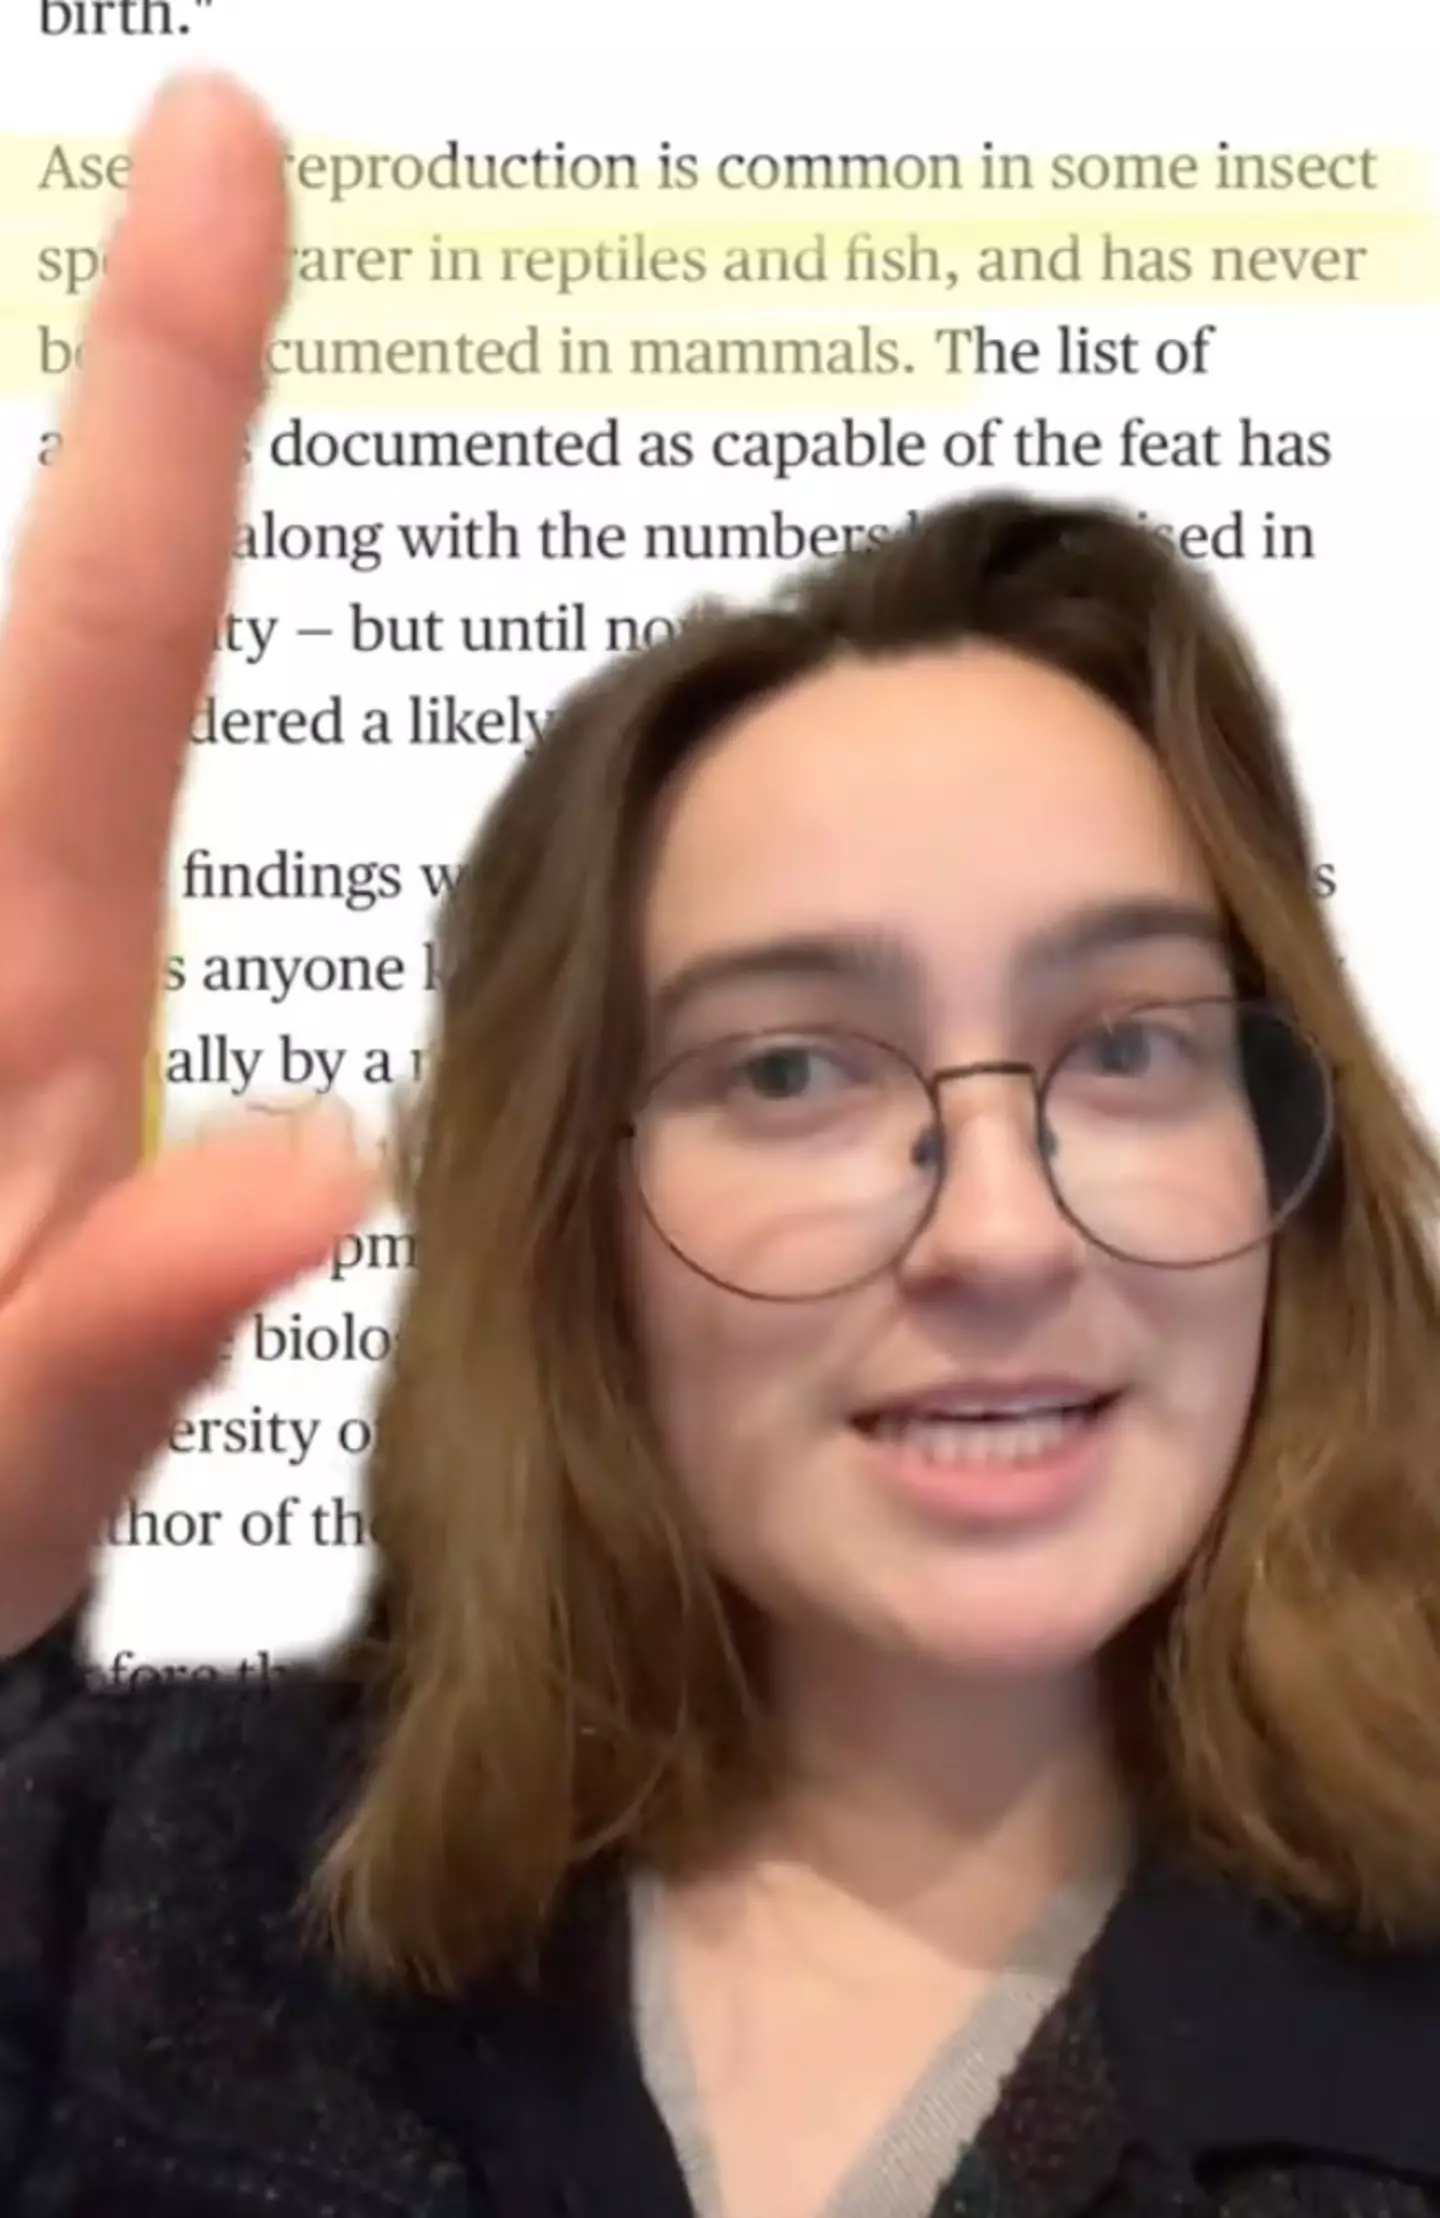 Allie O’Brien shared her wacky theory about Charlotte's pregnancy on TikTok.